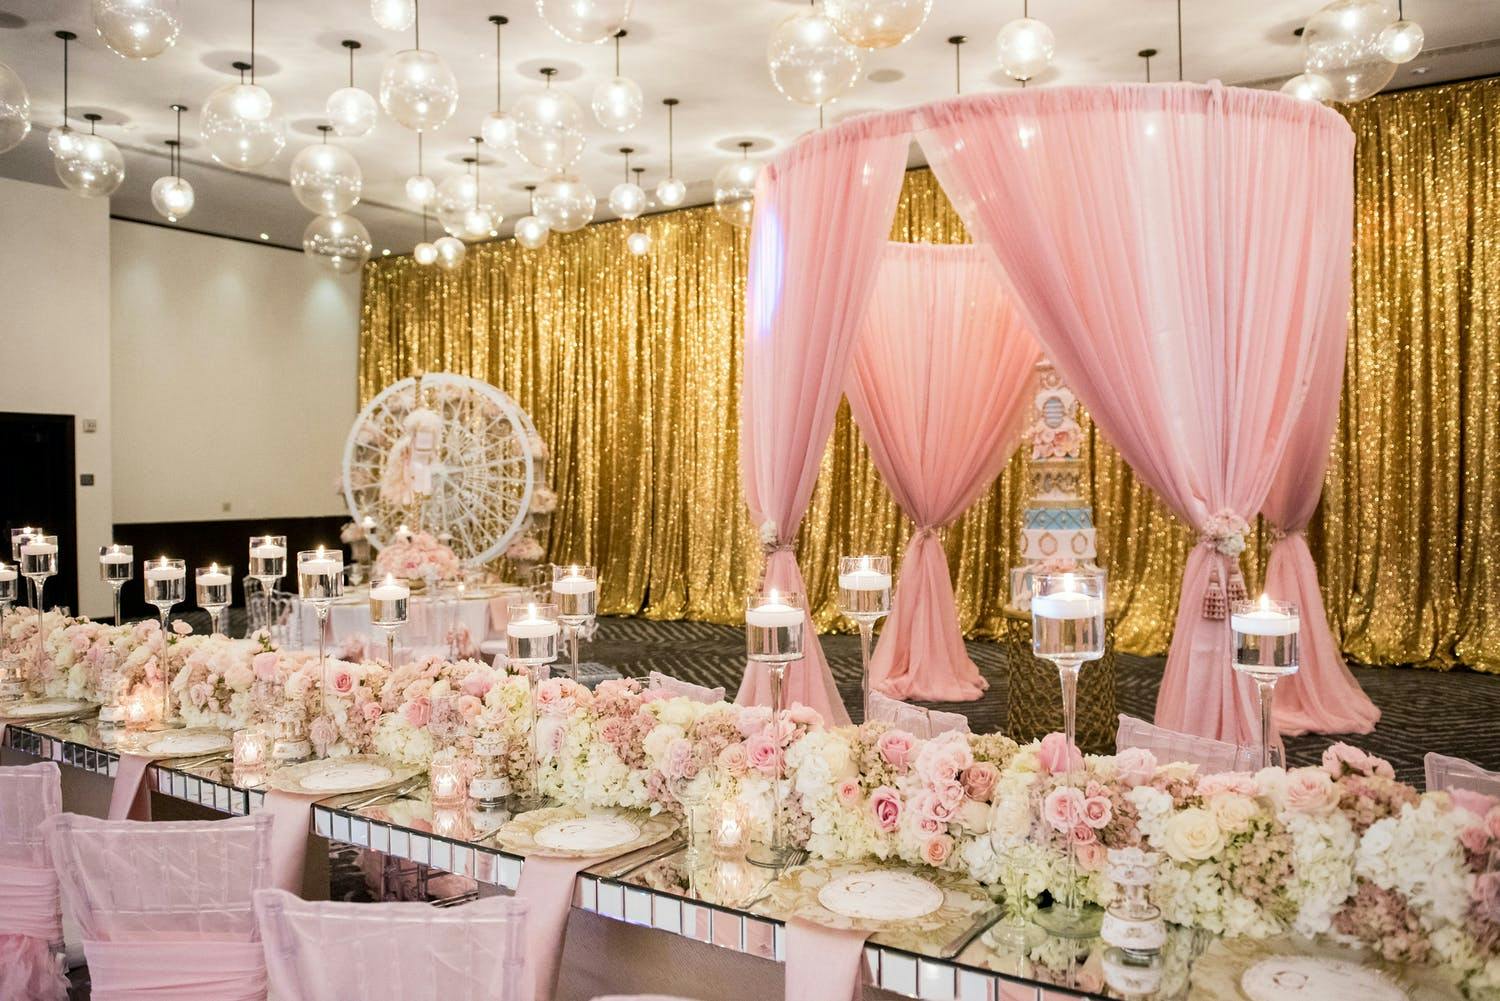 Carousel-Themed Baby Shower in Pink | PartySlate